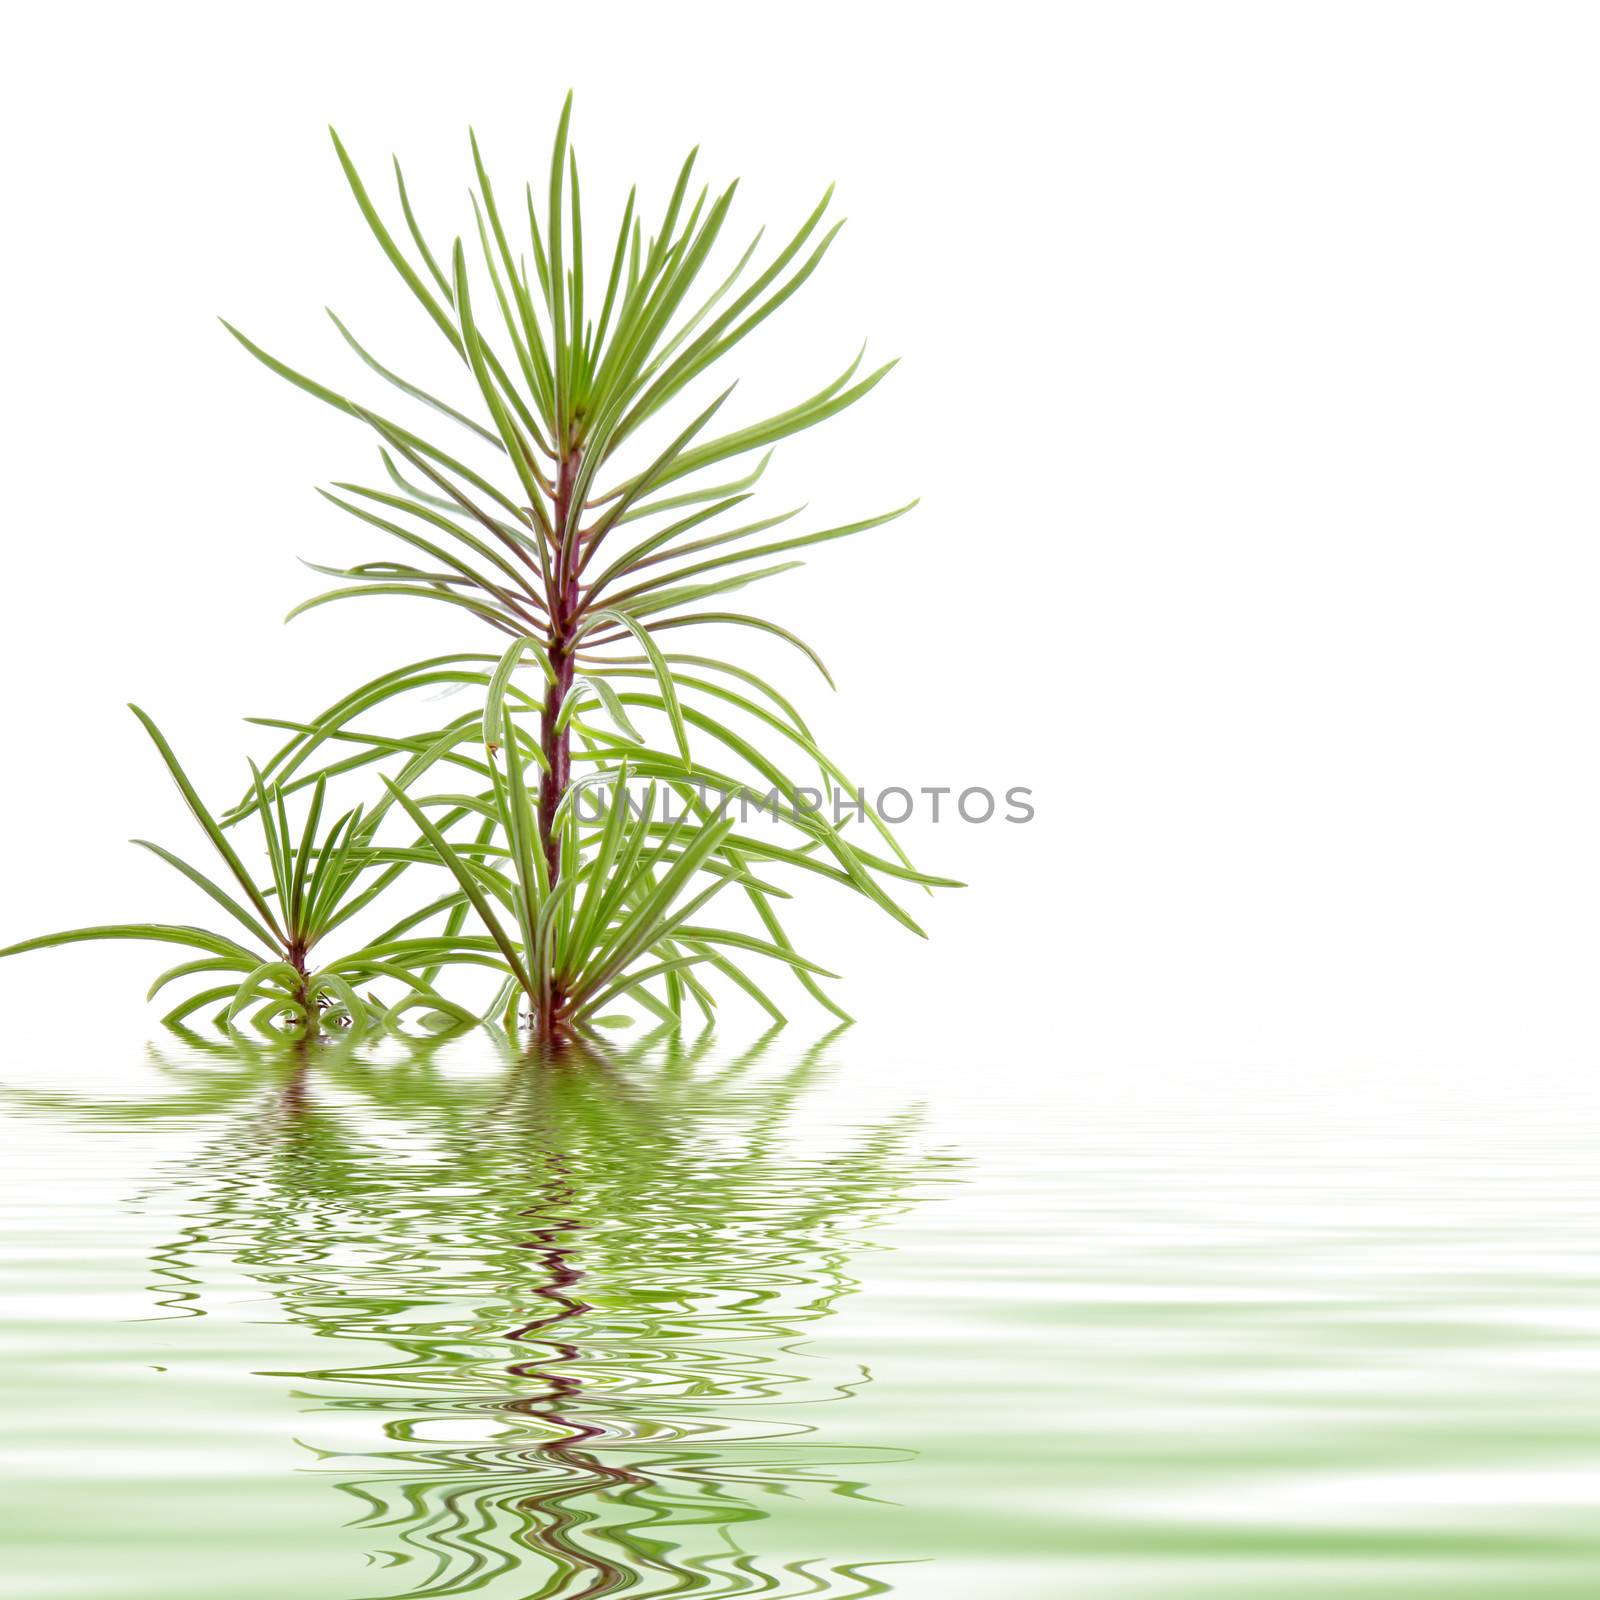 Delicate needles on a pine branch reflected in rippling shimmering water for a fresh natural tranquil background with copyspace